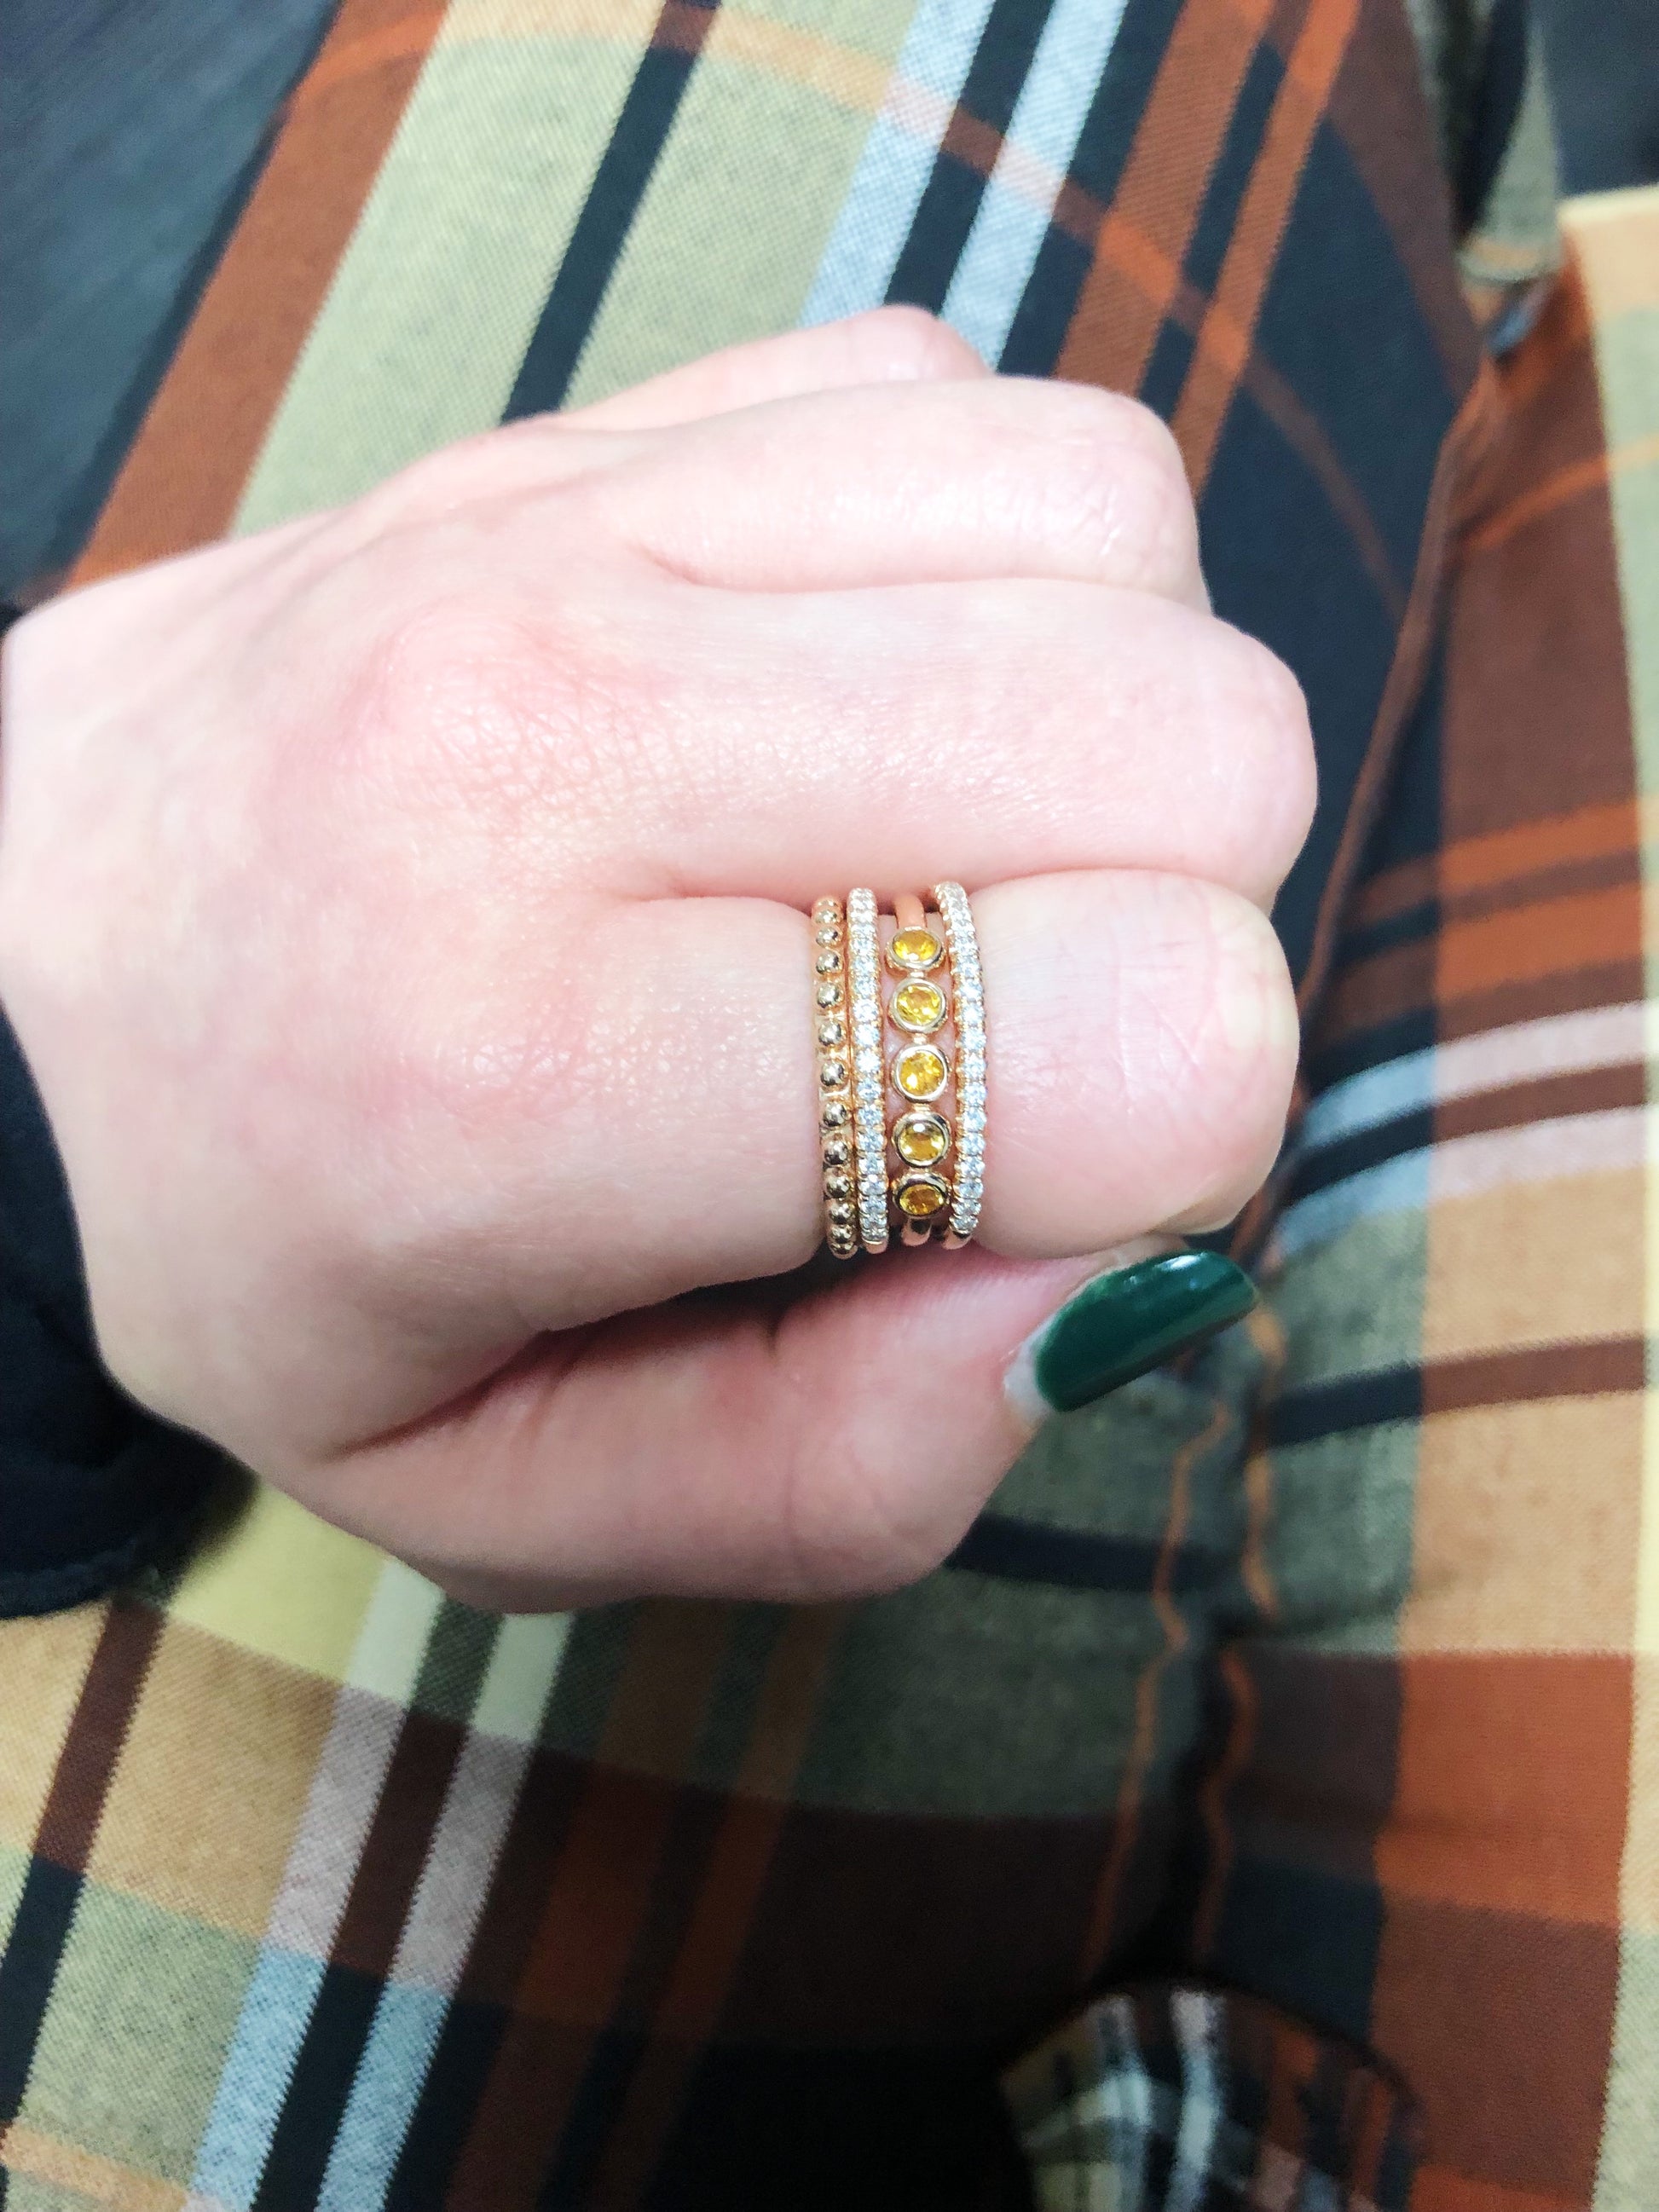 Thin banned ring with a row of diamonds beautifully stacked